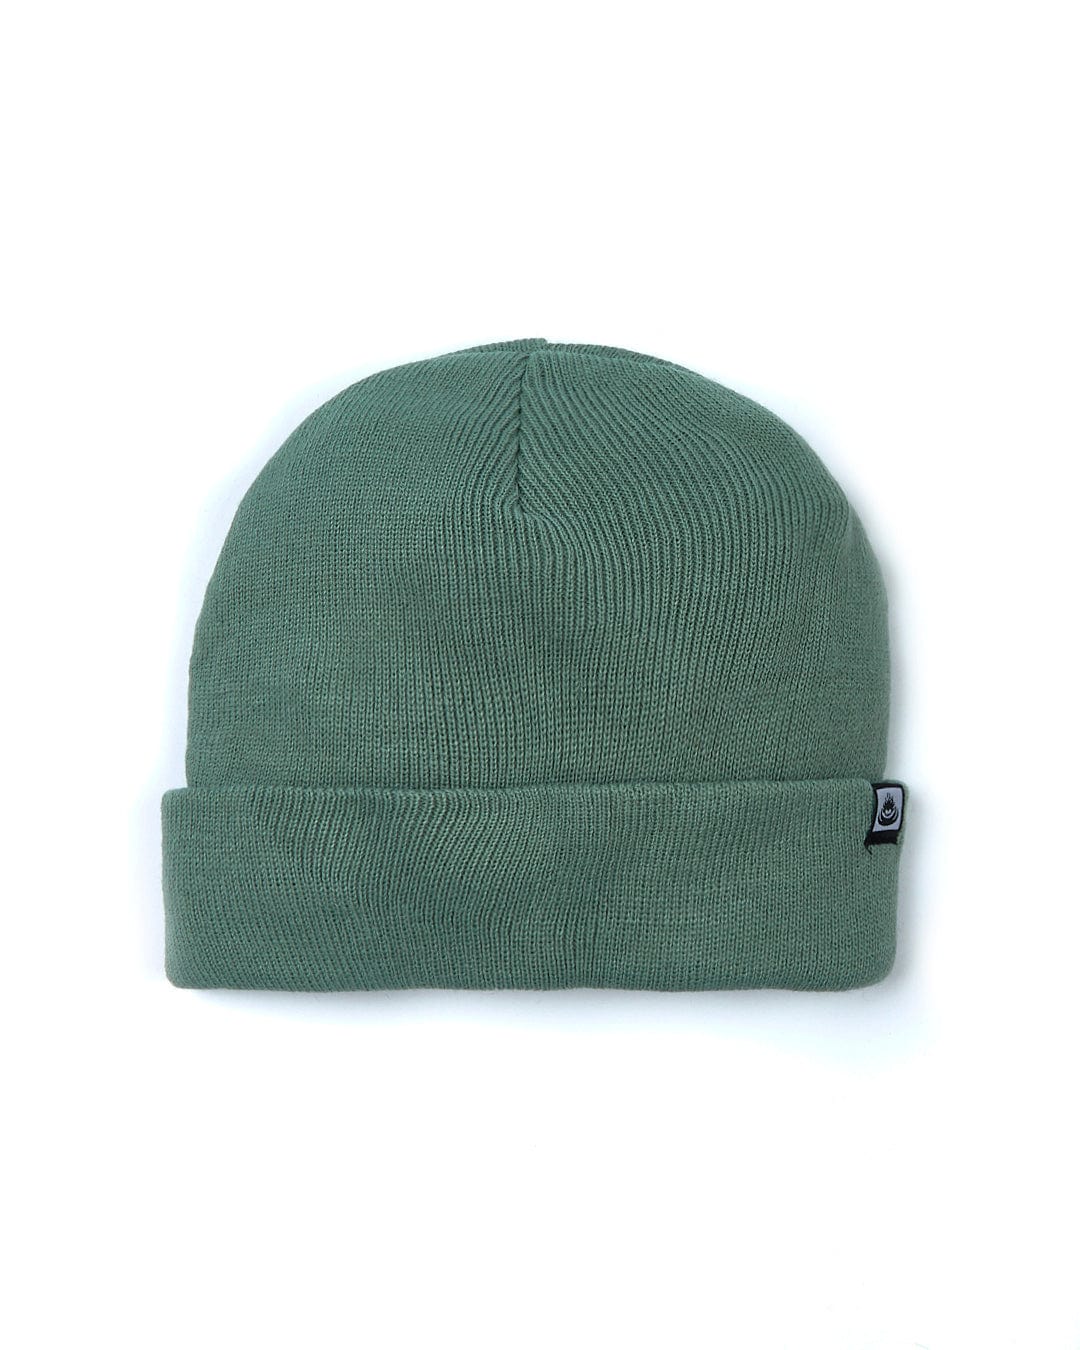 A Saltrock Ok - Tight Knit Beanie - Light Green on a white background.